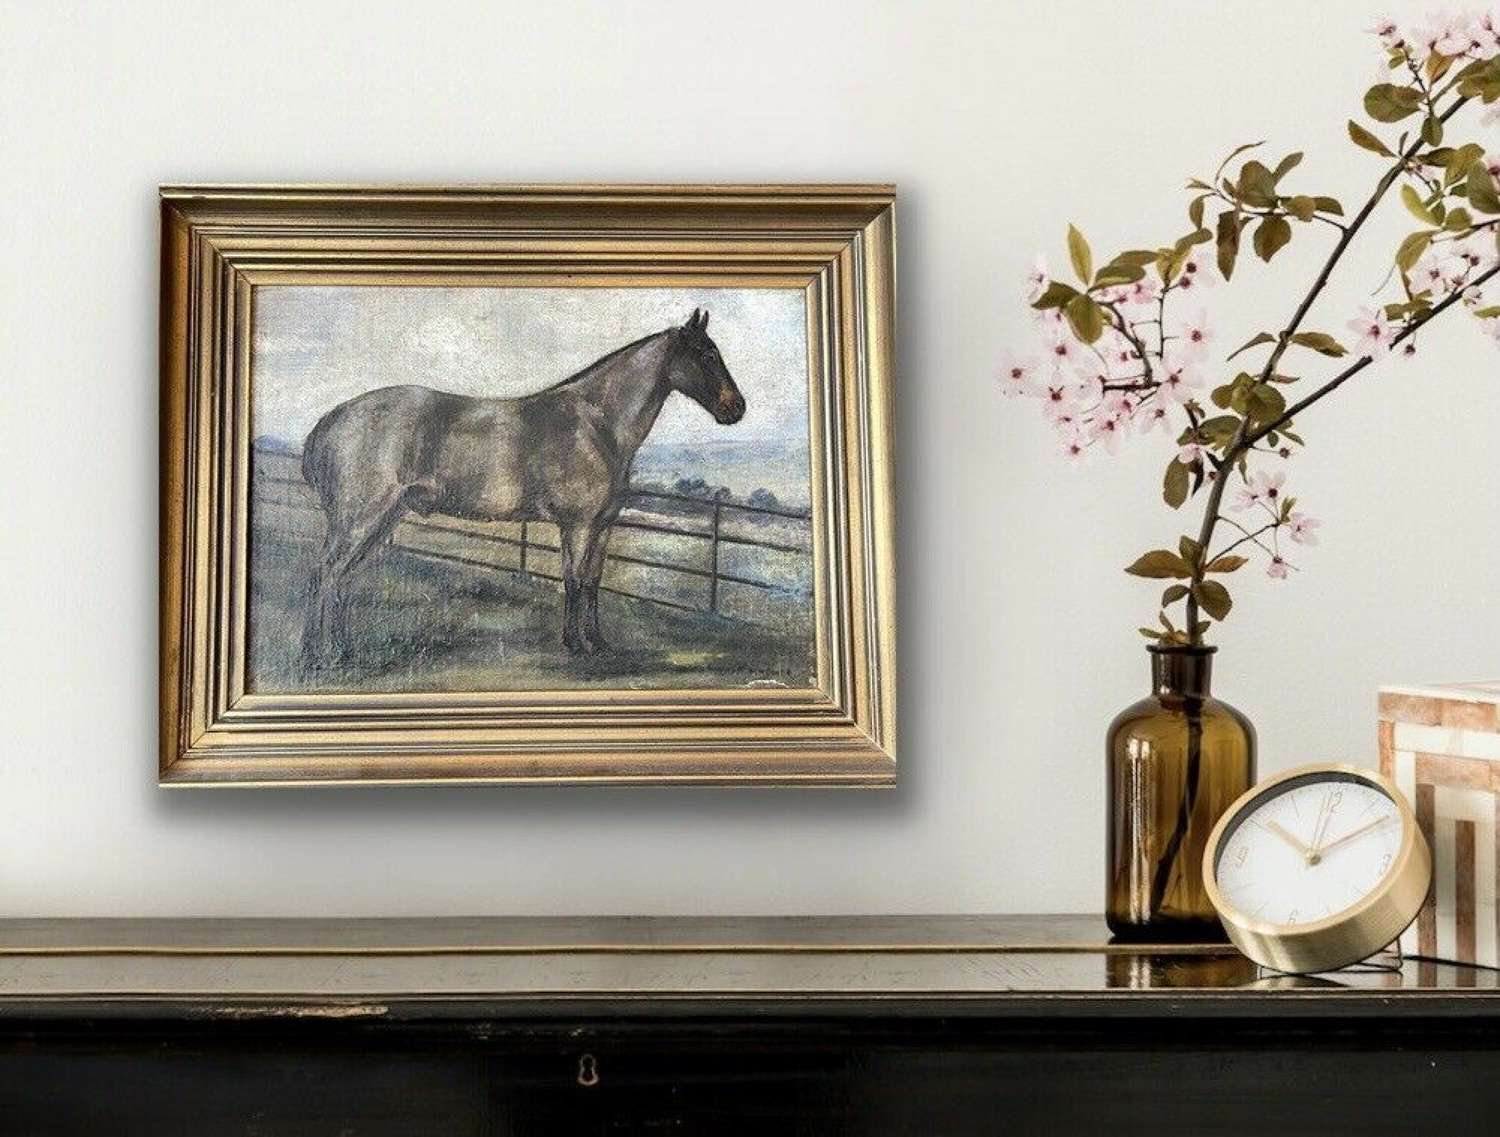 Early 20th Century study of a horse by Norah Fox Archer